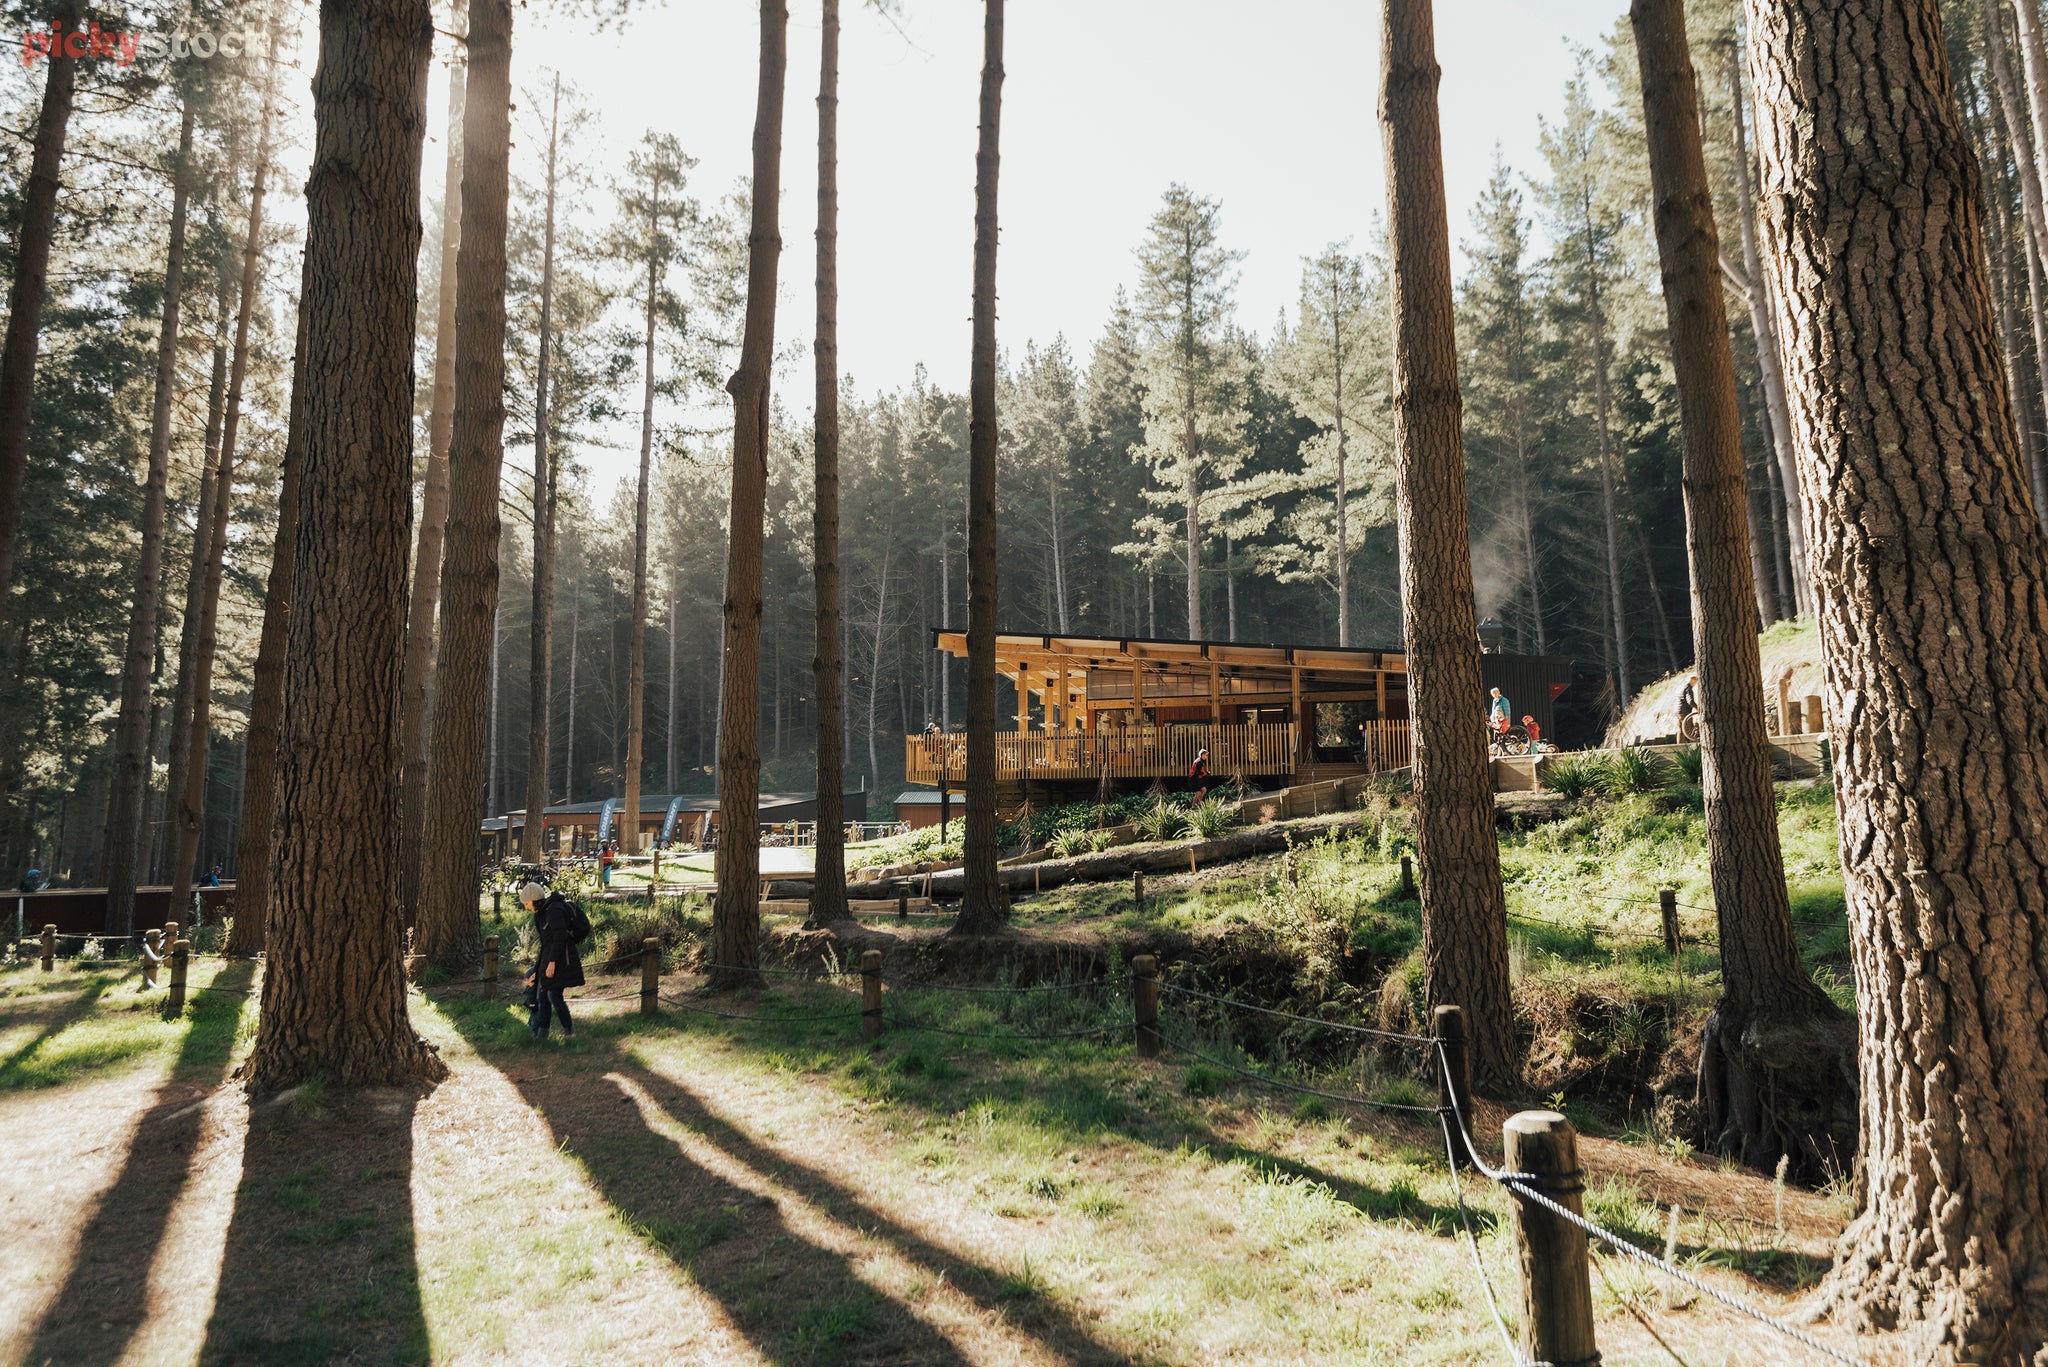 Early morning in a pine forest, there is a wooden building with a sloped roof. Mountain bikers check their bikes and other people walk through the forest.